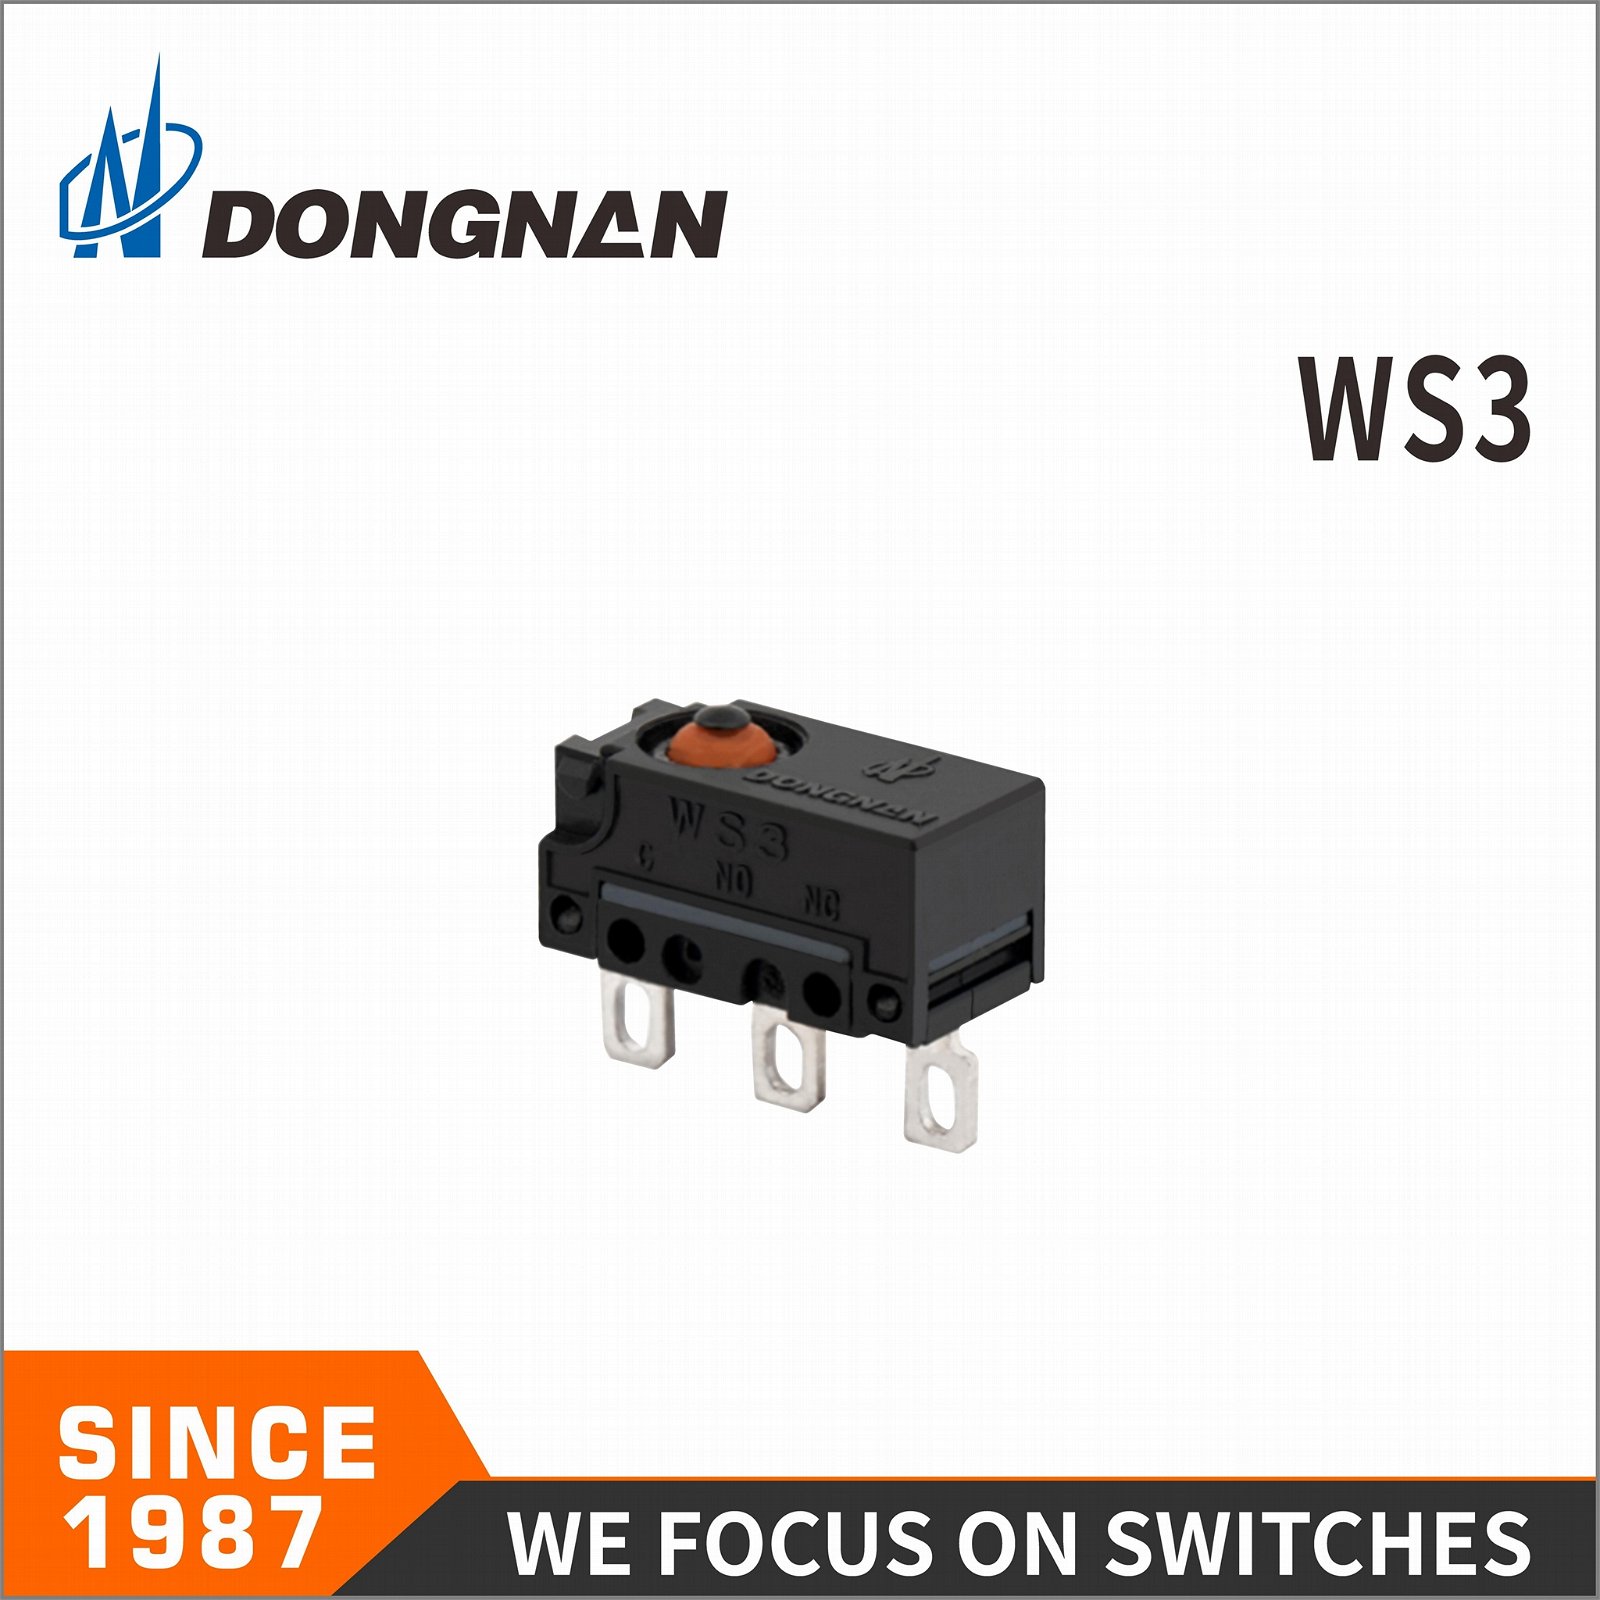 Dongnan Gas Range Ws3 Waterproof and Dustproof Micros Witch Withstand Voltage 5